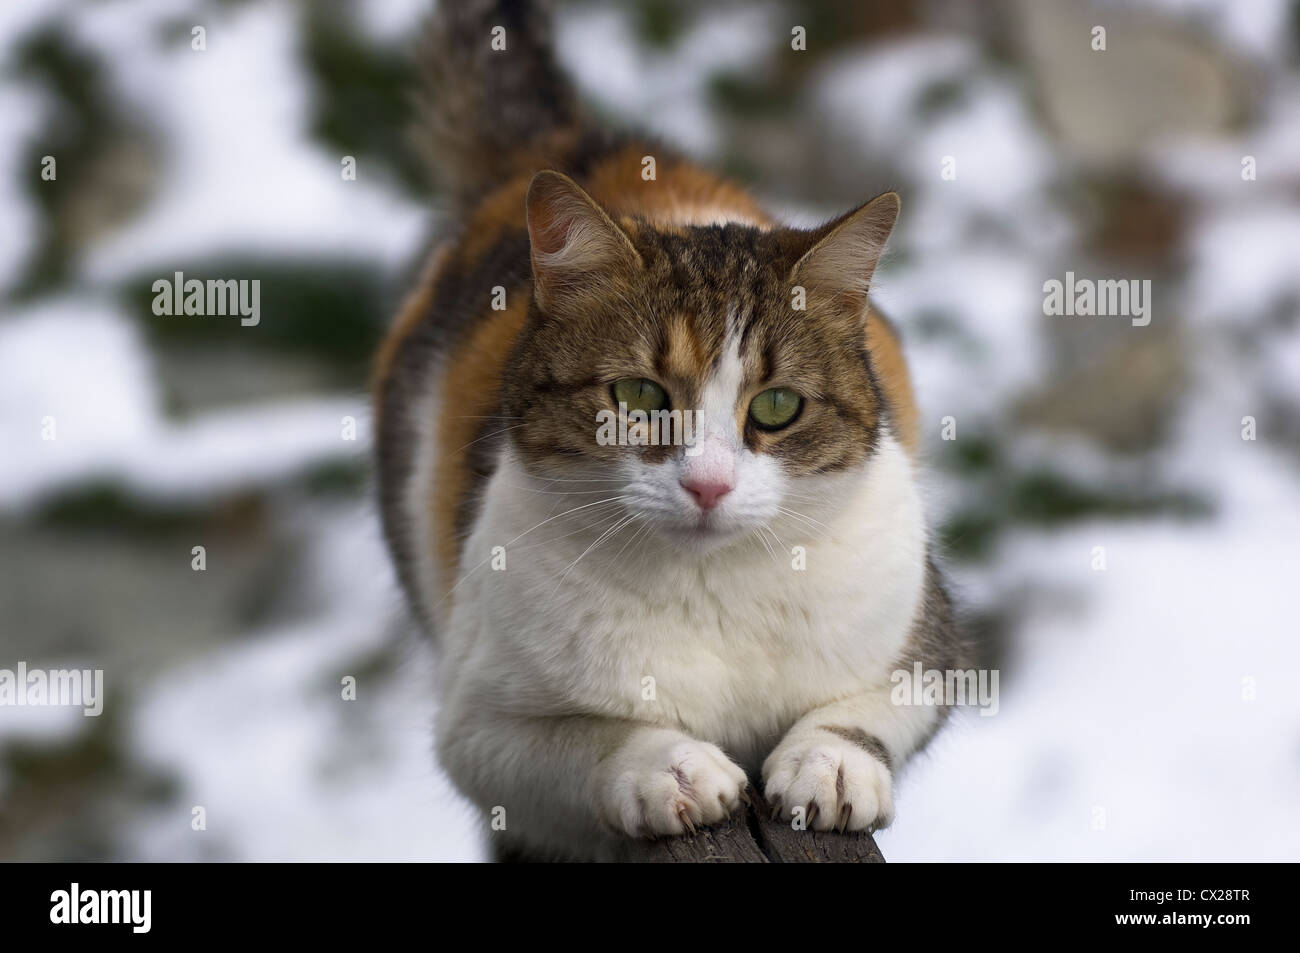 Tortoiseshell cat sharpening its claws on a wooden banister and looking at  camera (snow fields in the background) Stock Photo